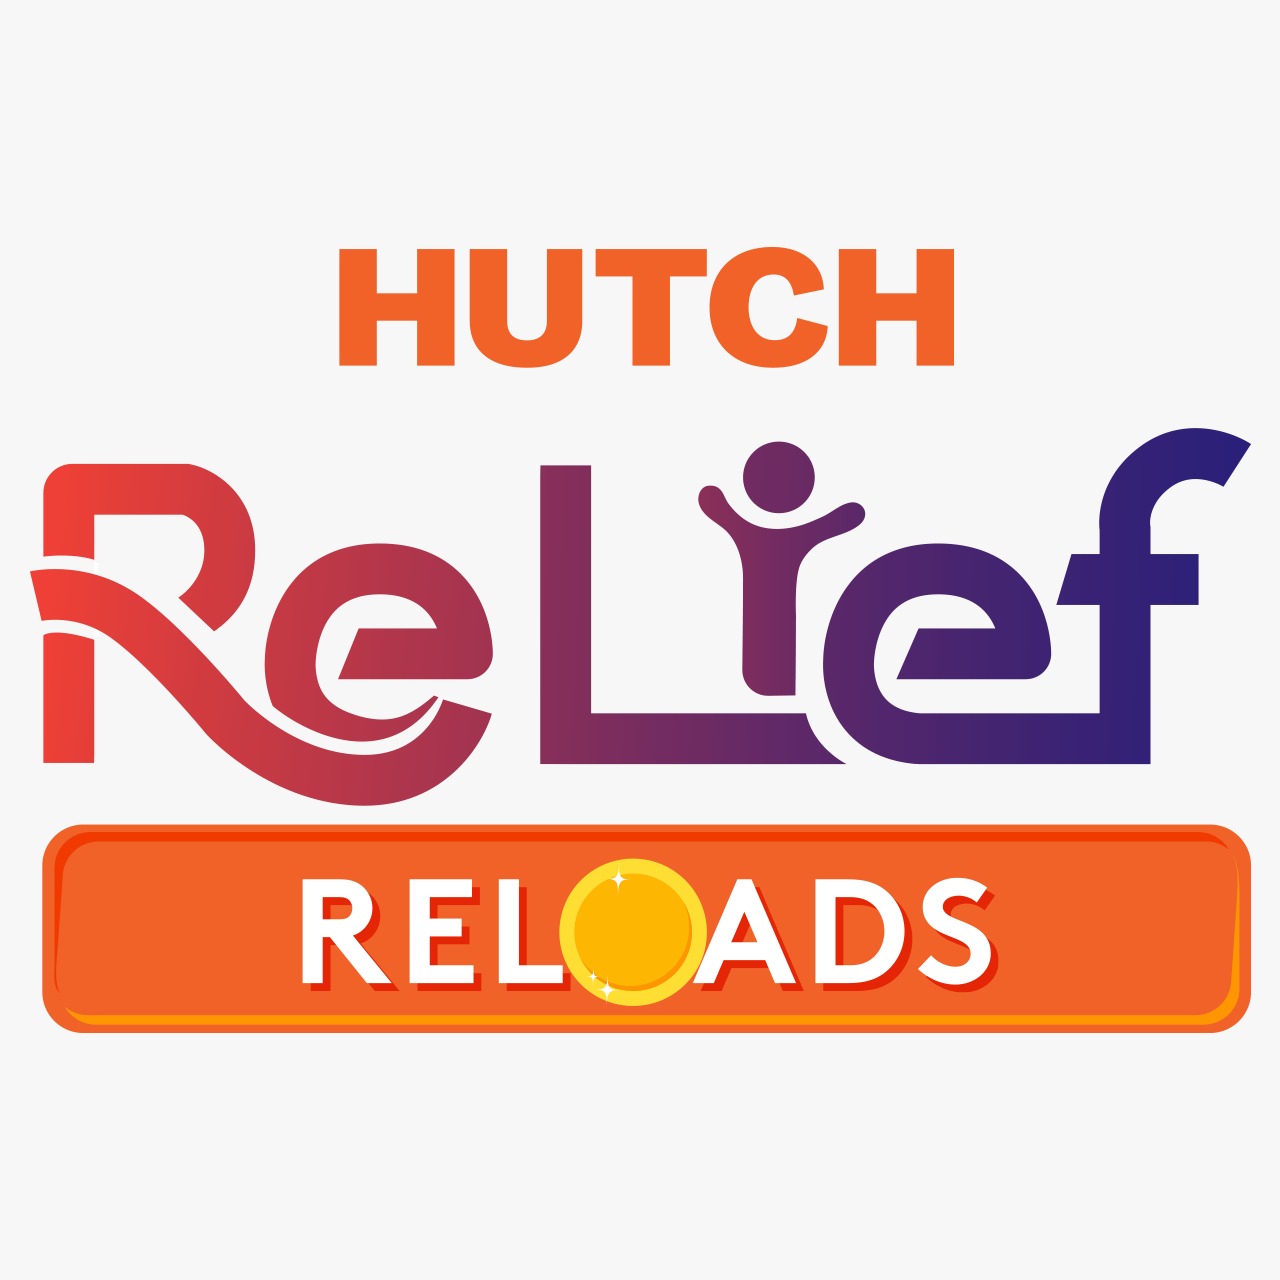 Hutch offers free daily relief reload of Rs. 15 to all its subscribers to help in mitigating the COVID 19 risk